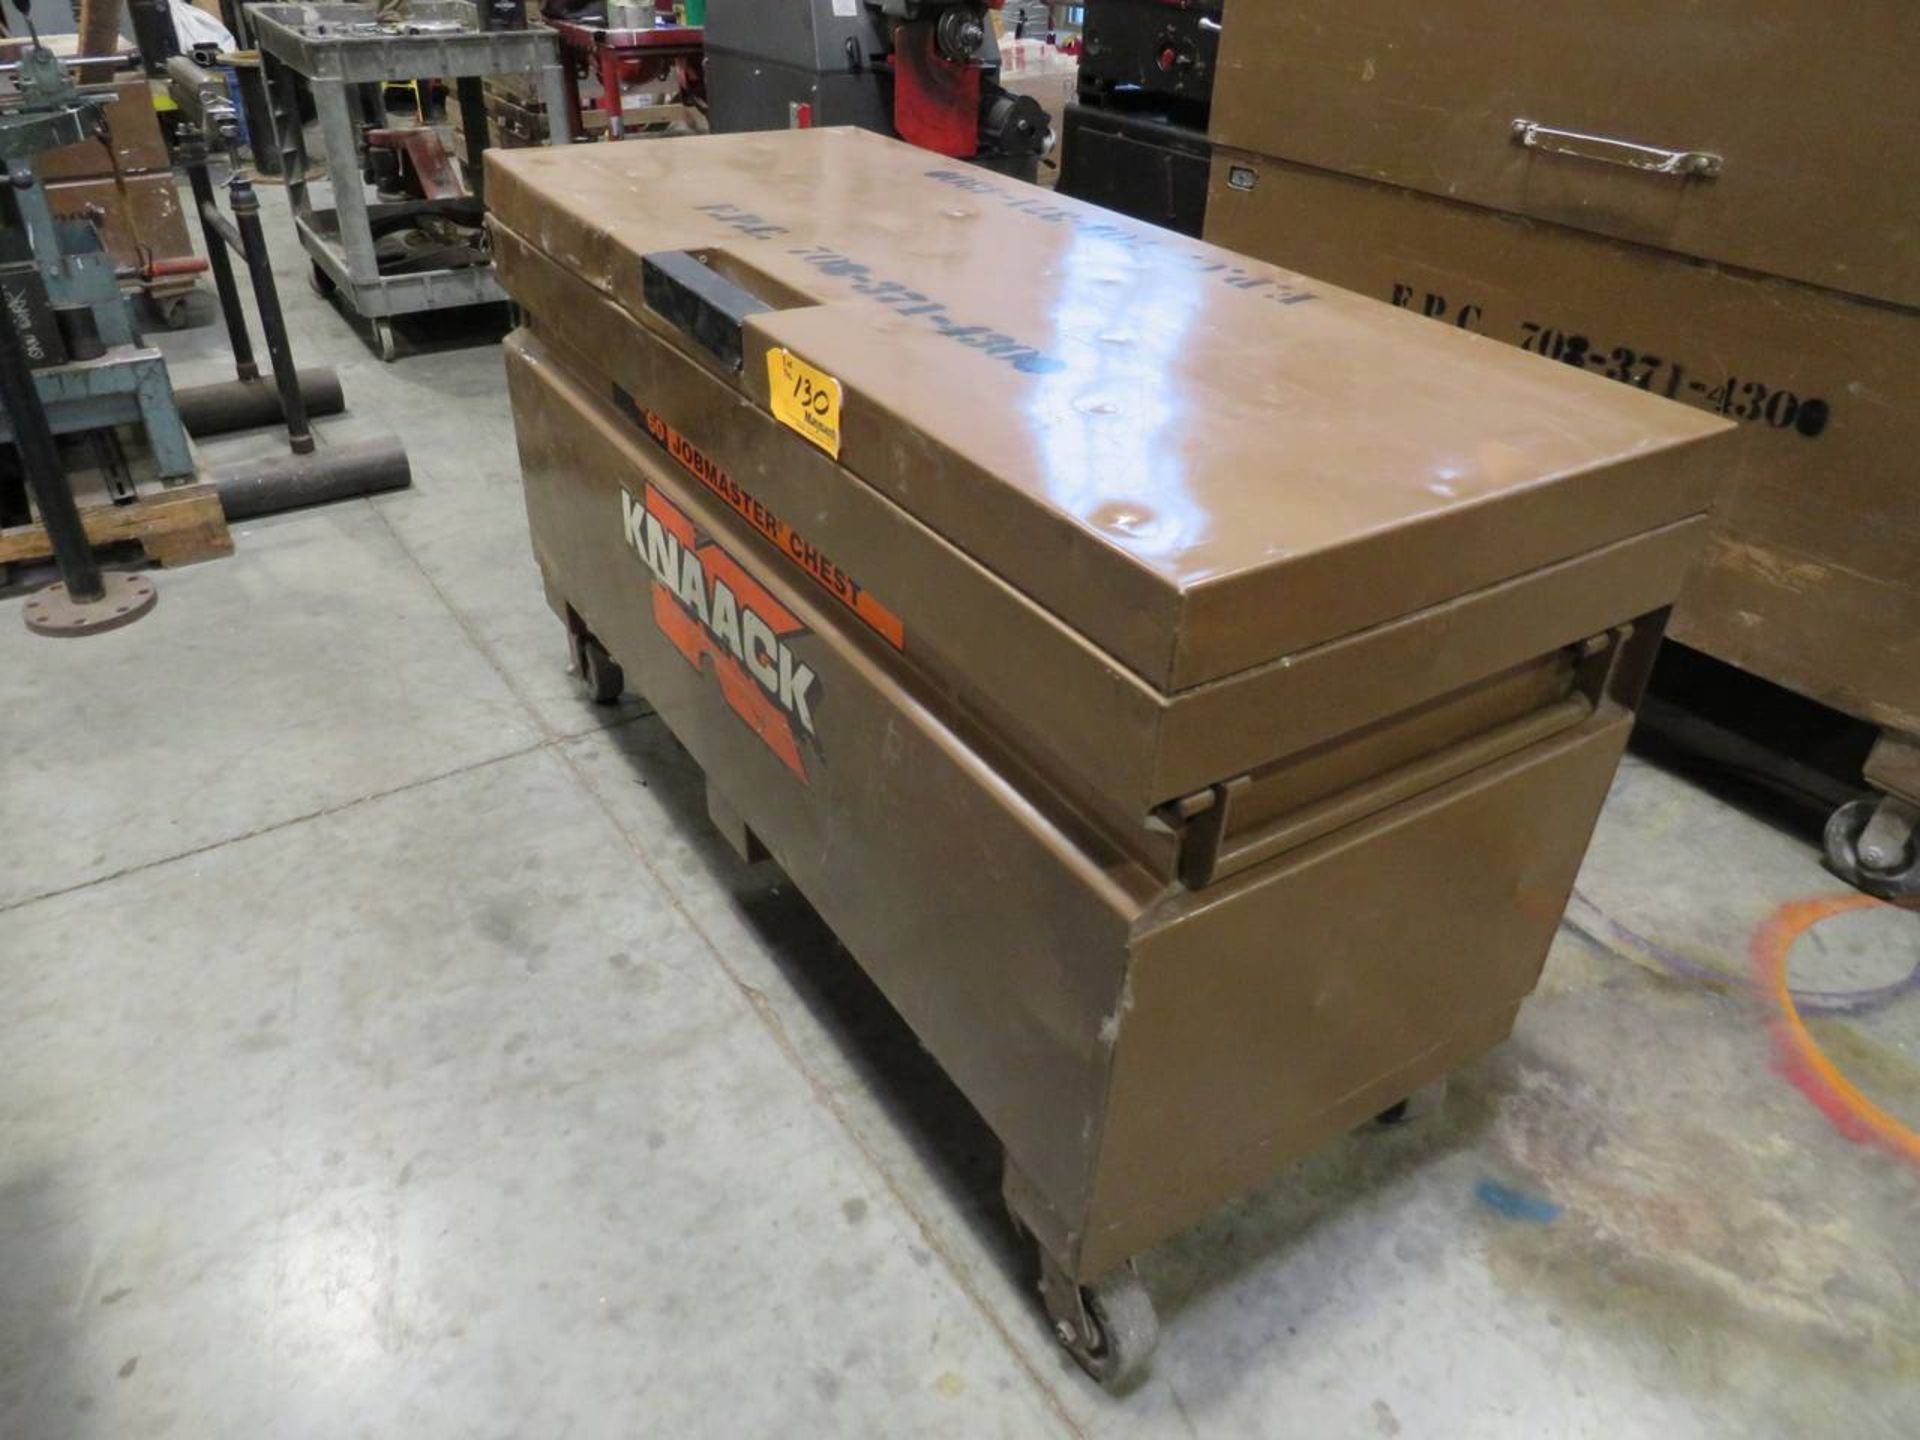 Knaack 60 Job Master 20.25 Cu. Ft. Approx. 60" W x 24" D x 36" H Storage Chest - Image 7 of 9